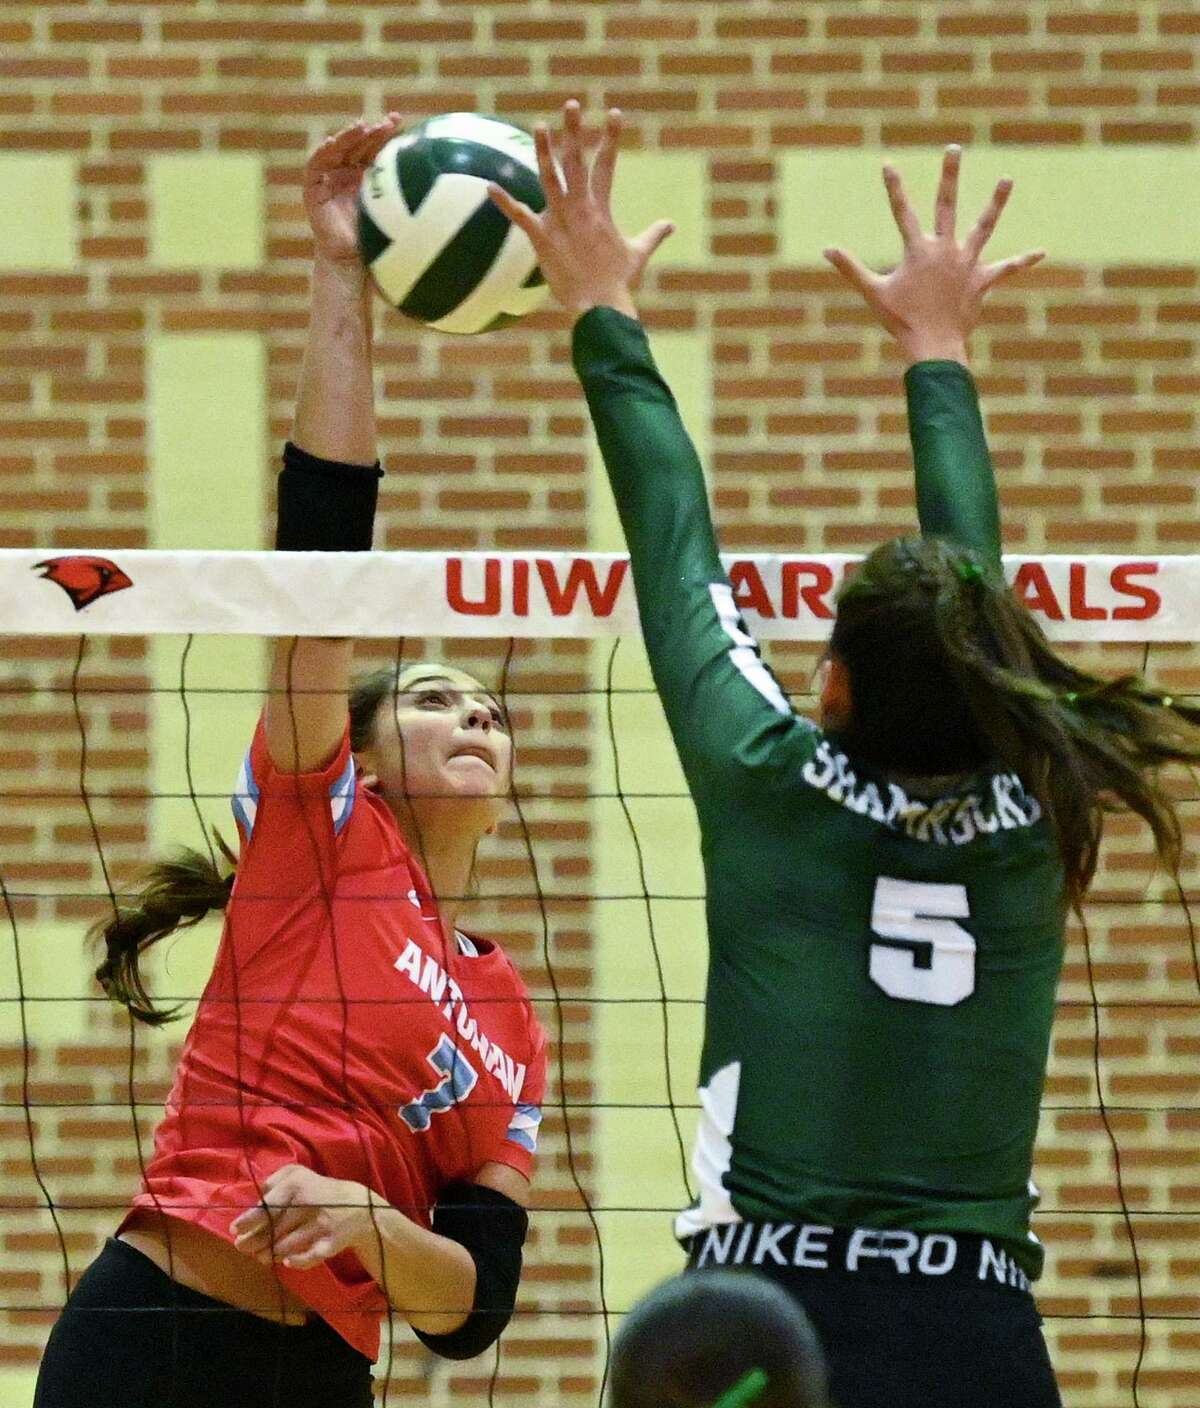 Kalina Calvillo (7) of Antonian spikes the ball as Incarnate Word’s Giana Hilliard (5) attempts to defend during volleyball action at Incarnate Word on Wednesday, Oct. 5, 2022. Antonian won in three sets.